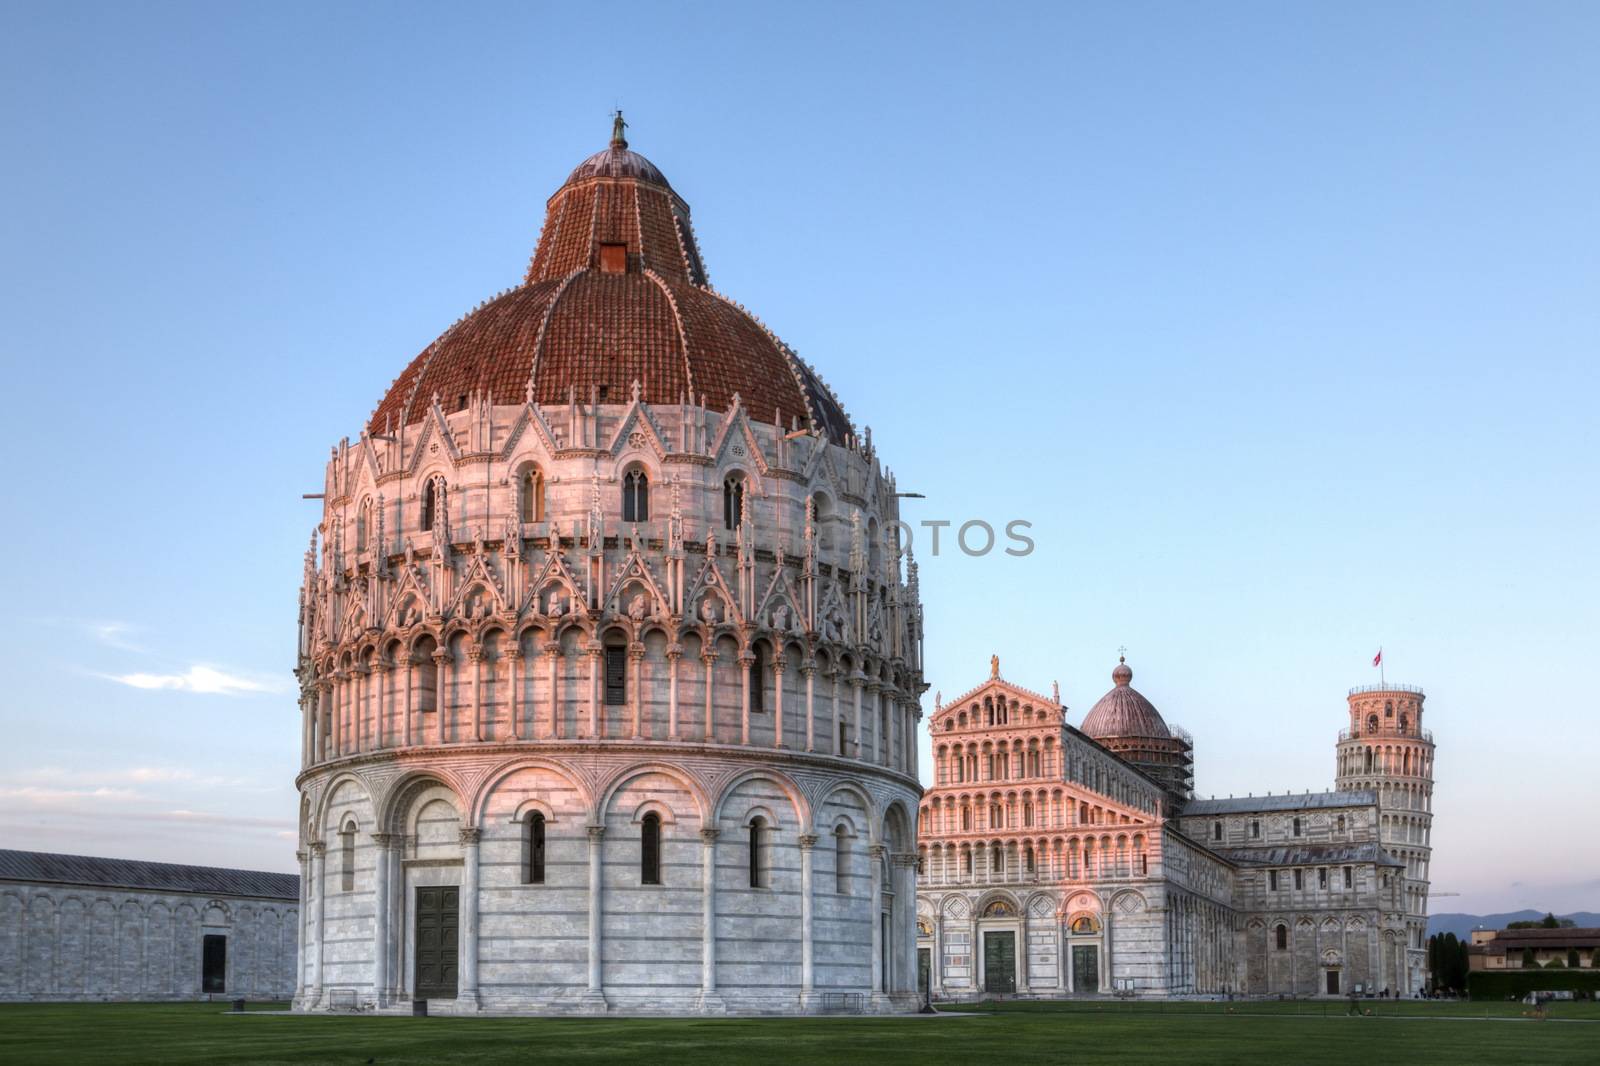 Piazza dei miracoli with the Basilica and the leaning tower, Pis by Elenaphotos21